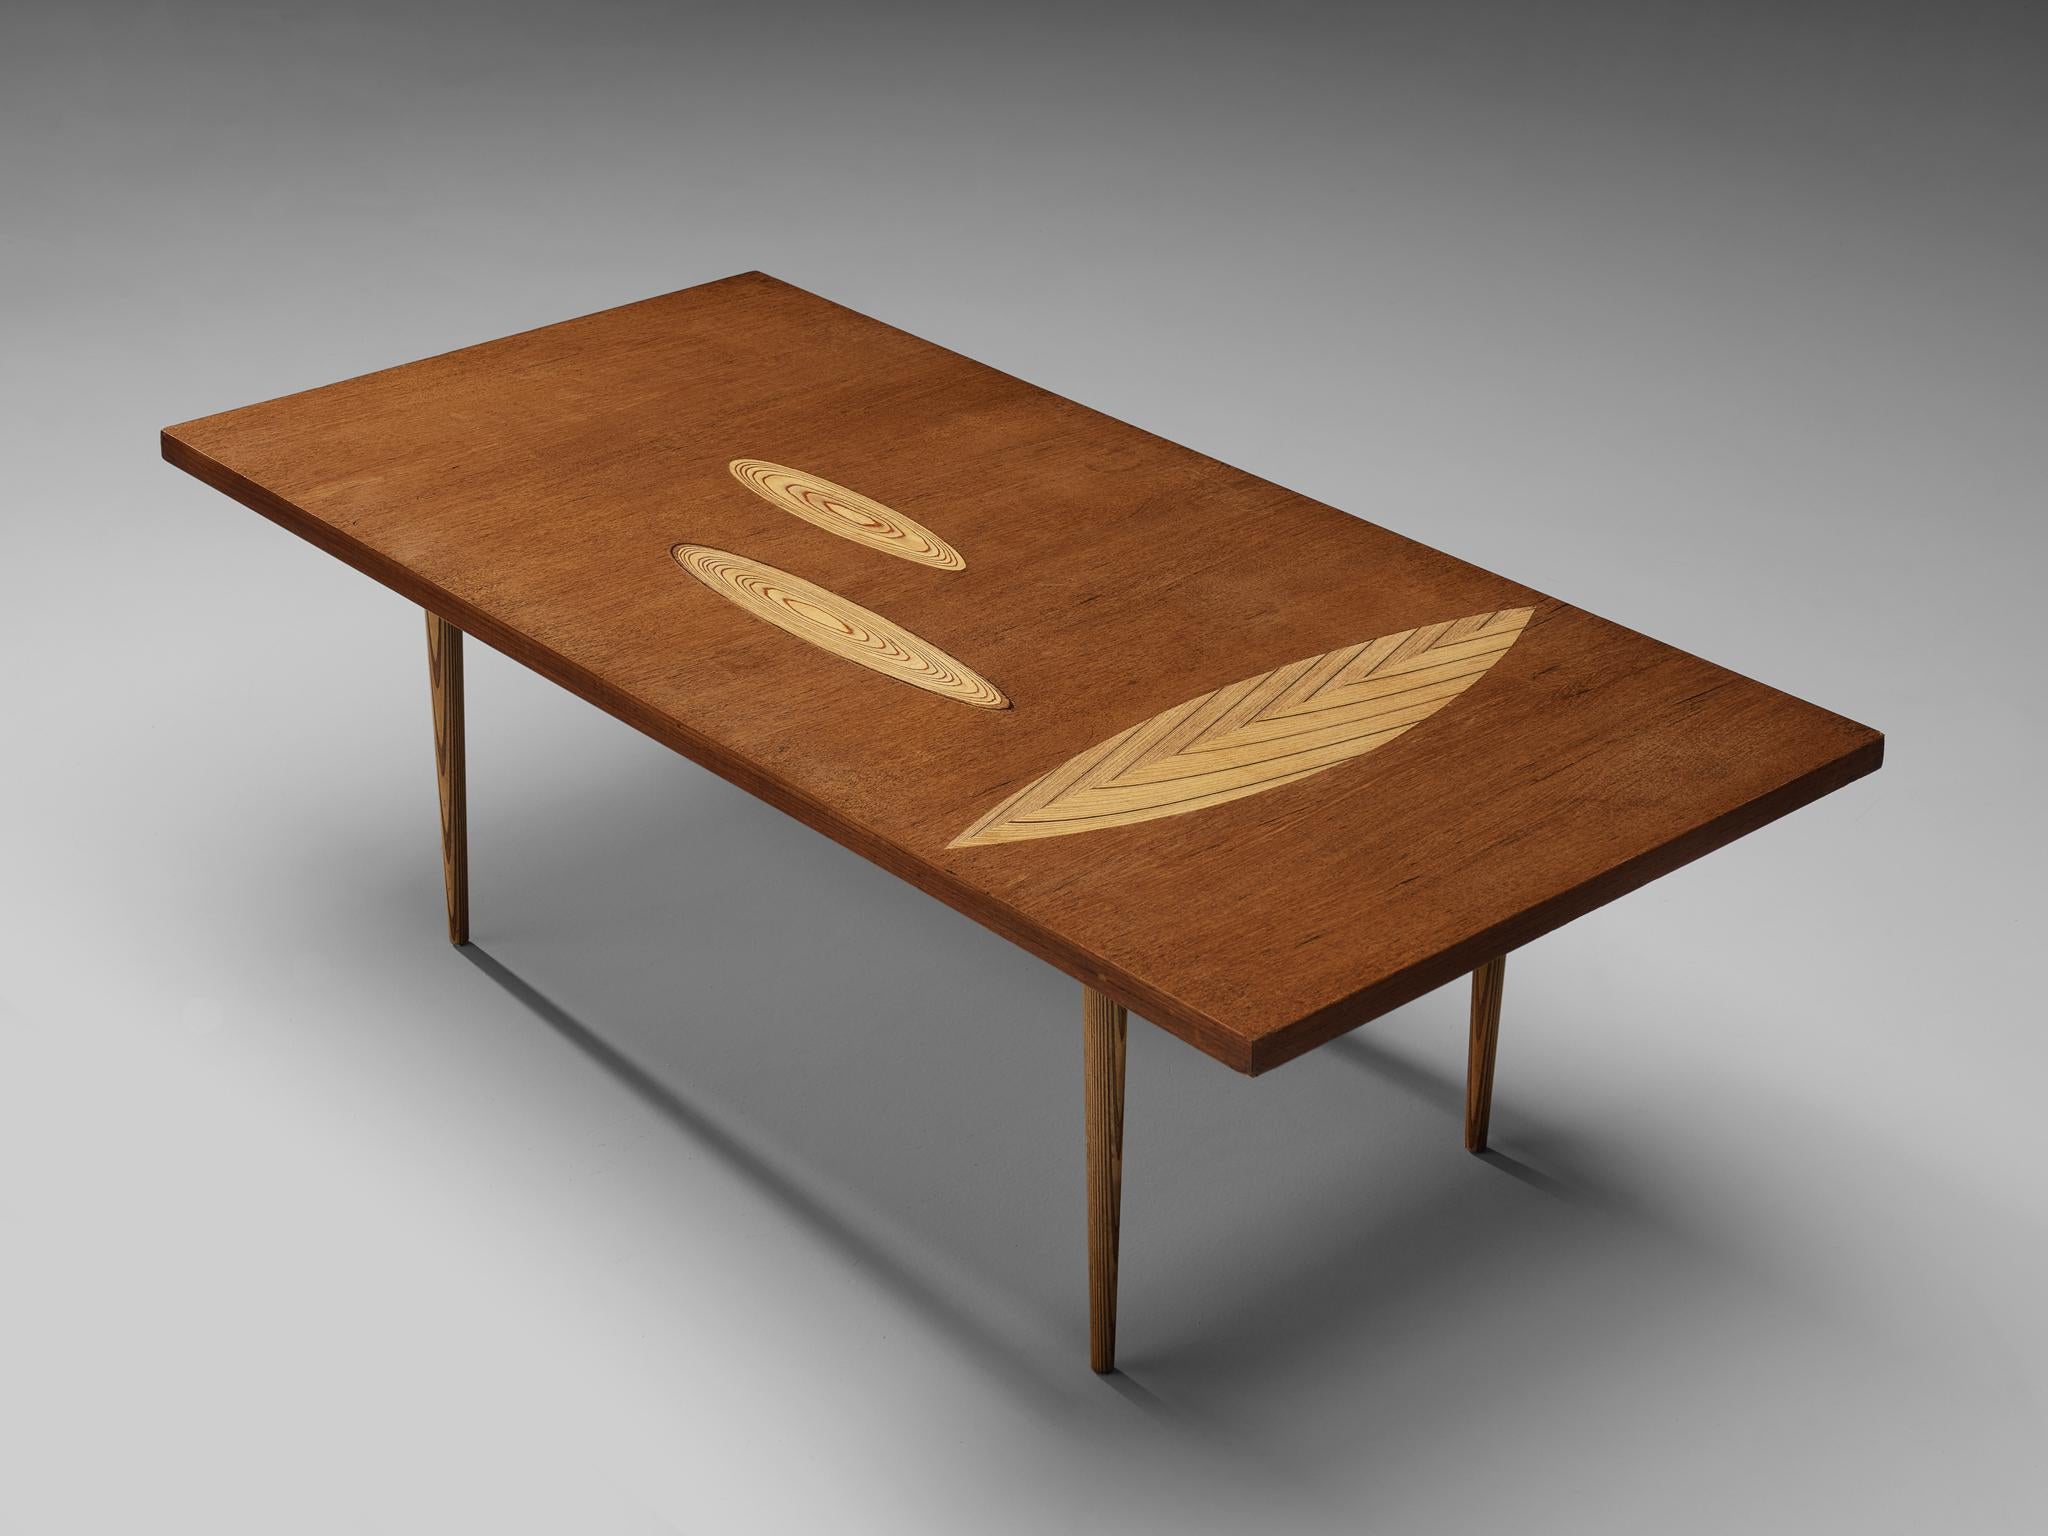 Tapio Wirkkala for Asko, cocktail table, teak, birch, Finland, 1960s.

Teak coffee table with wooden inlay ornaments designed by Tapio Wirkkala. The table is produced by Asko. This coffee table is one of Wirkkala's iconic furniture designs. Made